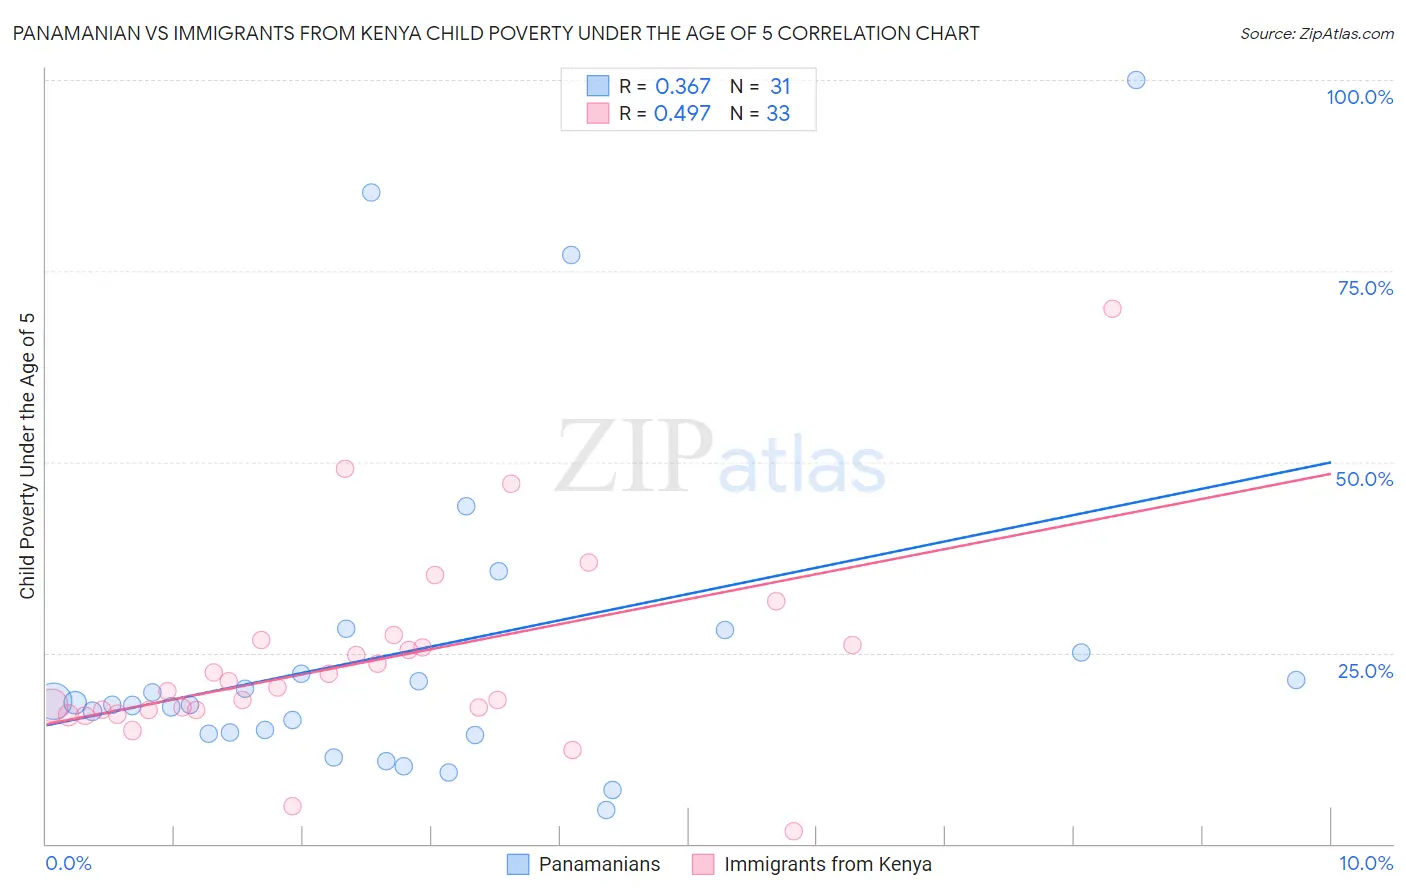 Panamanian vs Immigrants from Kenya Child Poverty Under the Age of 5